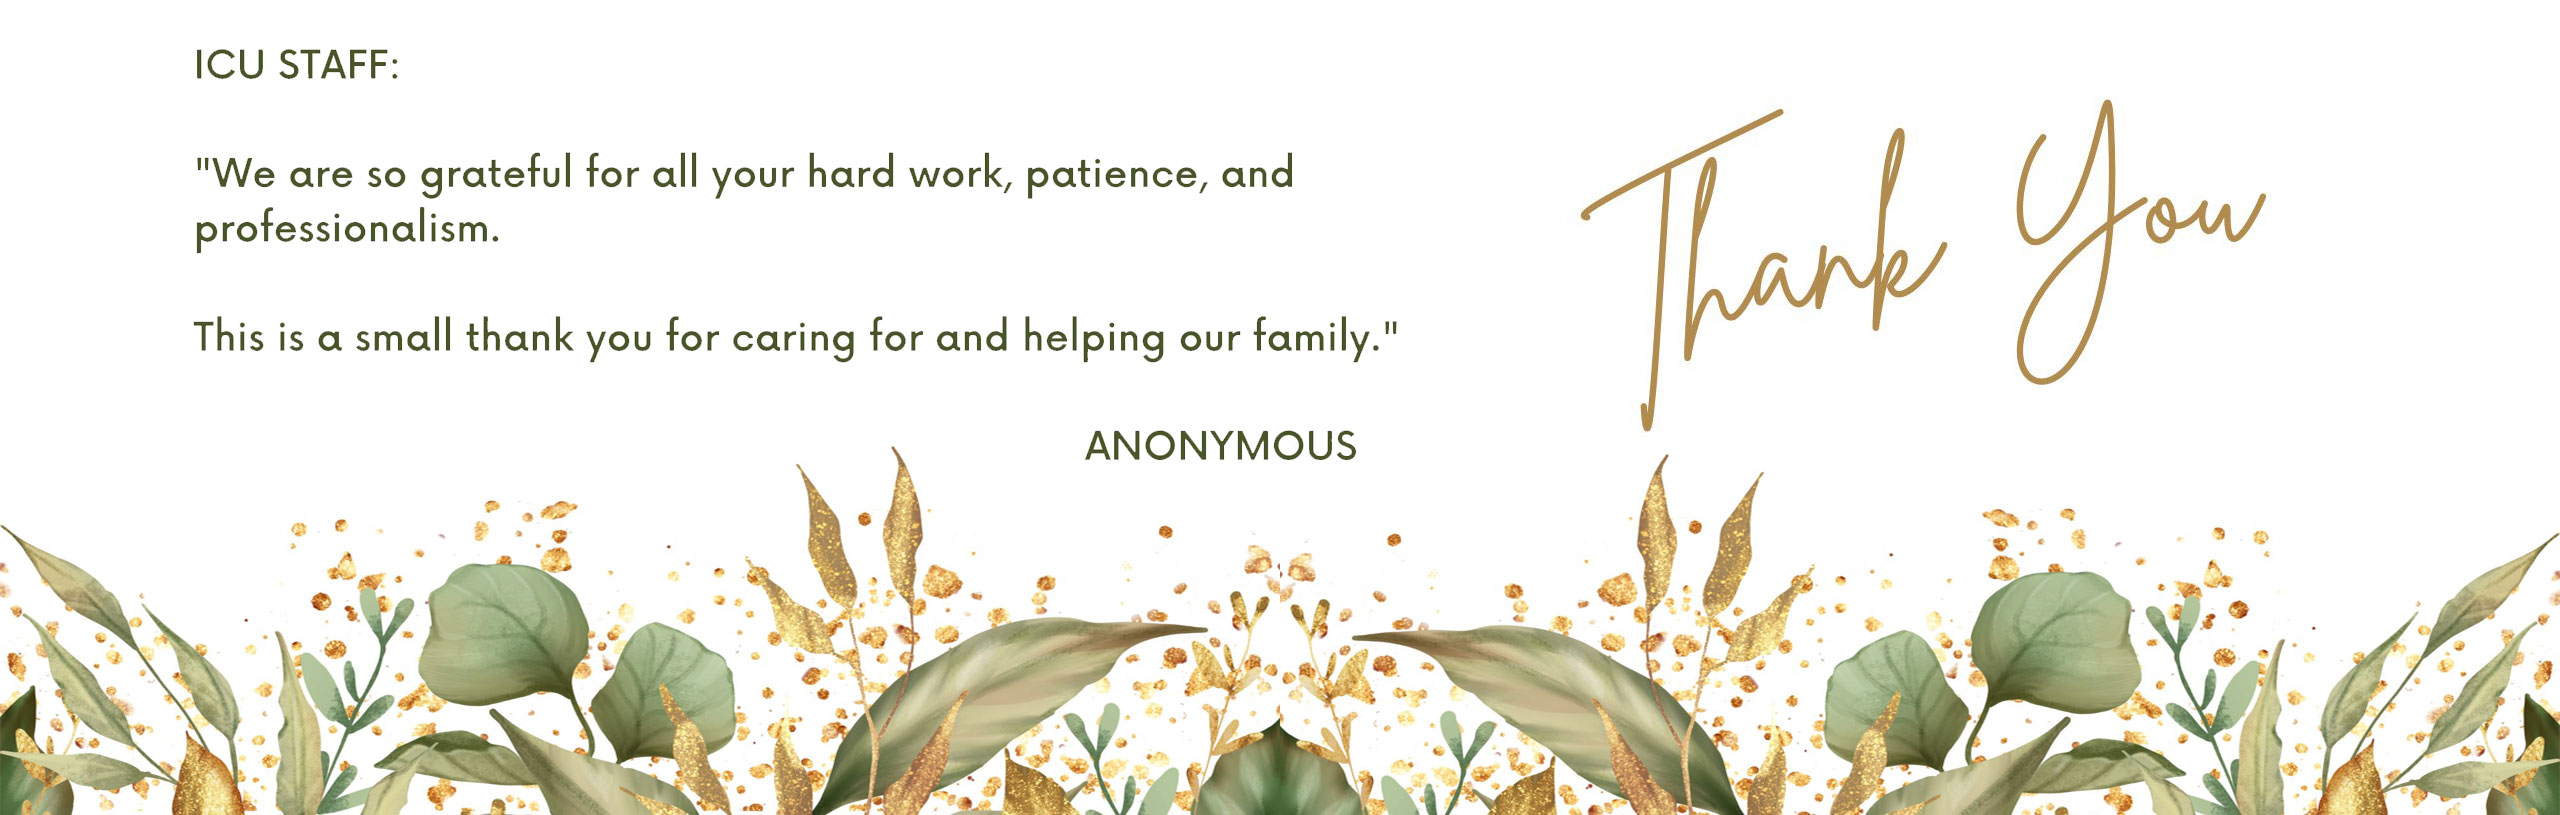 ICU STAFF:
"We are so grateful for all your hard work, patience, and professionalism.
This is a small thank you for caring for and helping our family."
Thank You
ANNOYMOUS